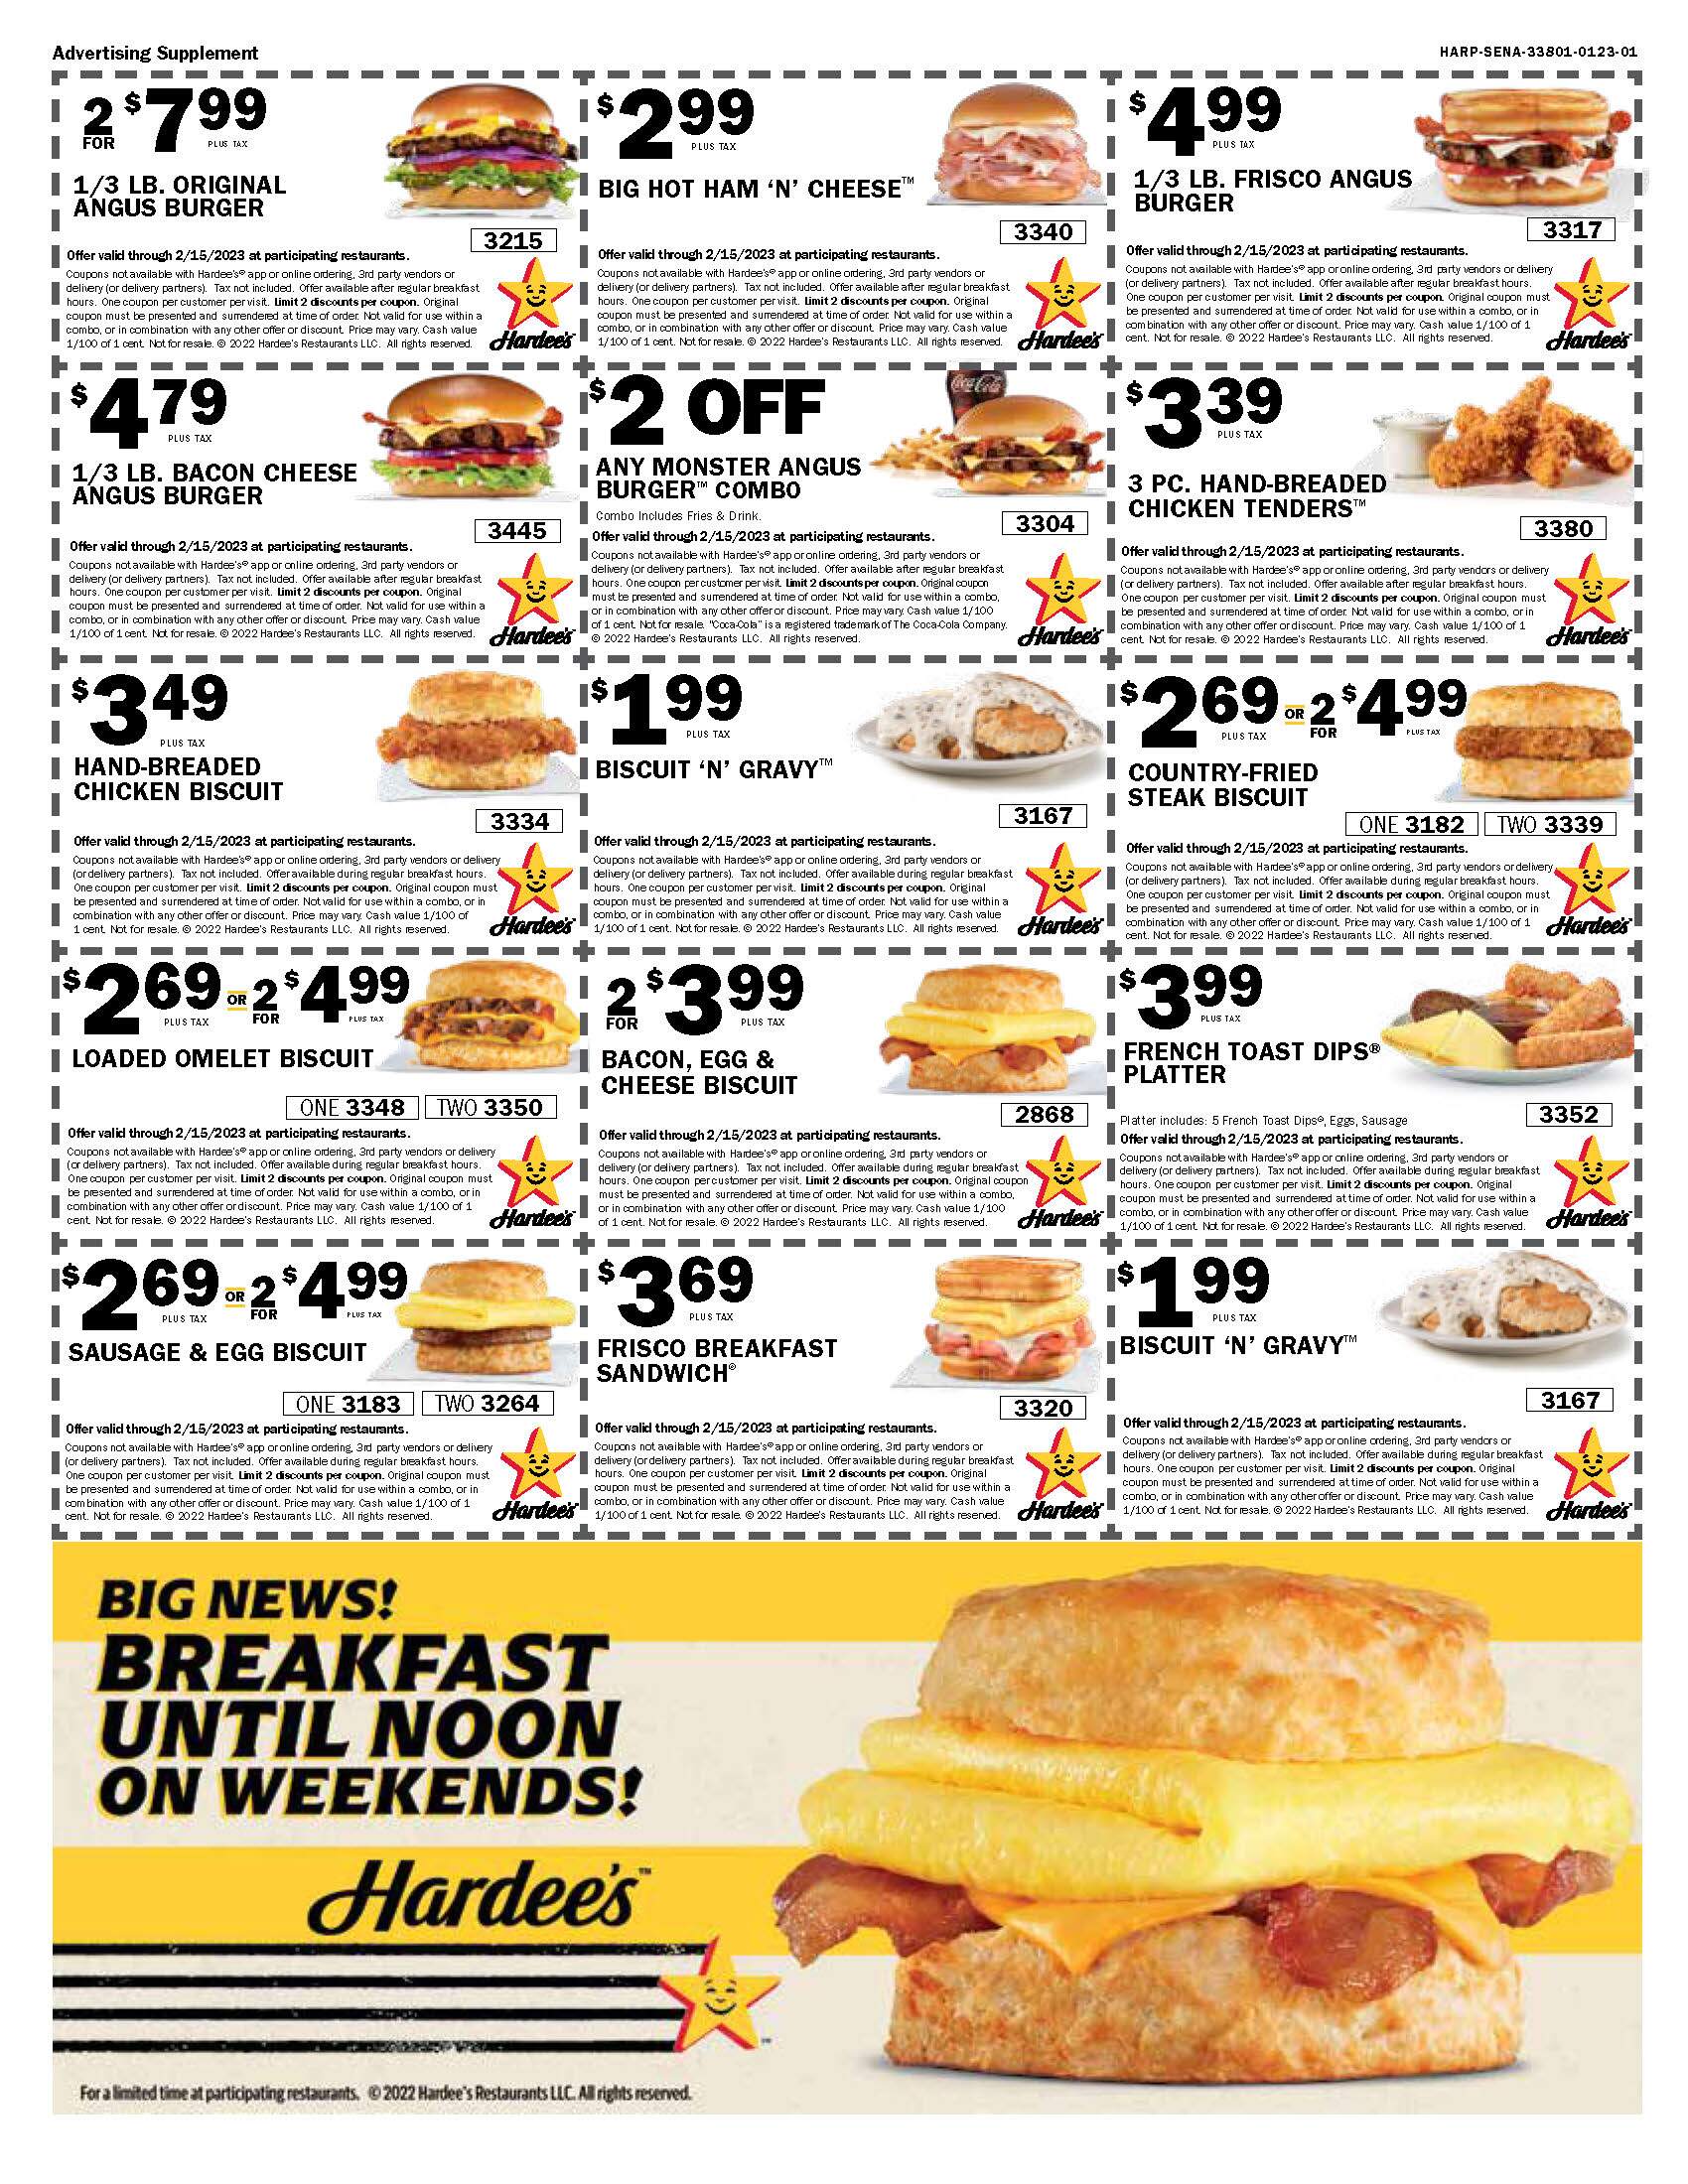 hardee's coupon inserts for newspapers